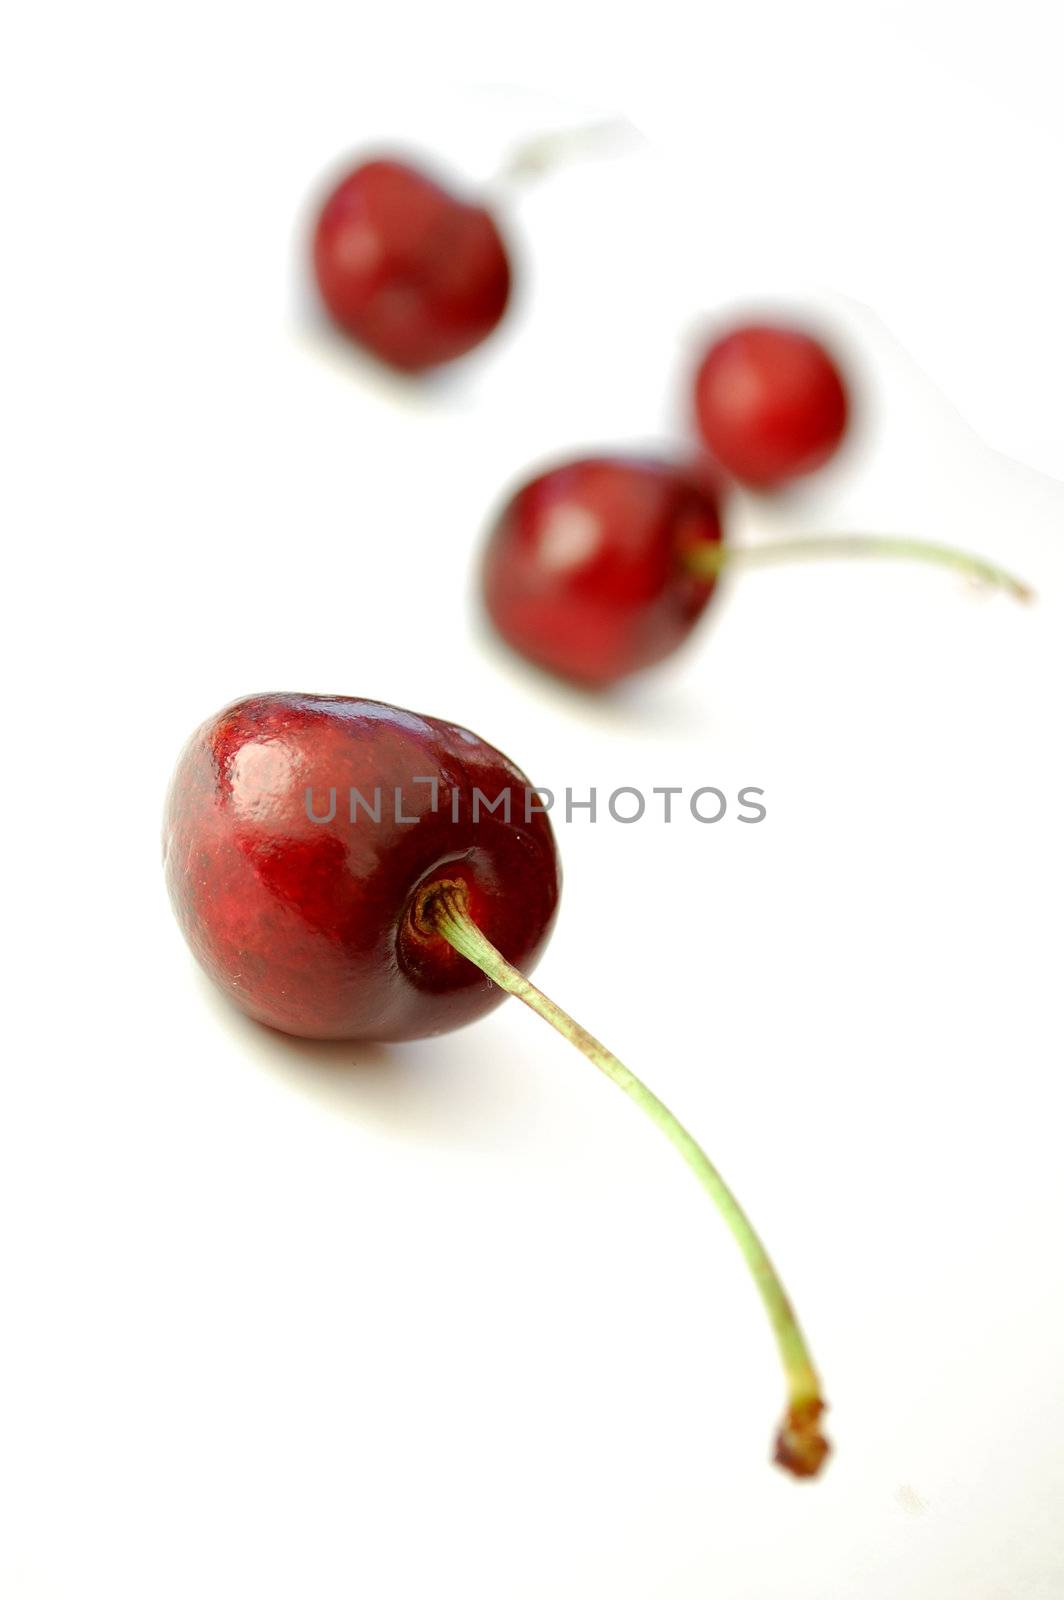 Isolated cherries on a white background